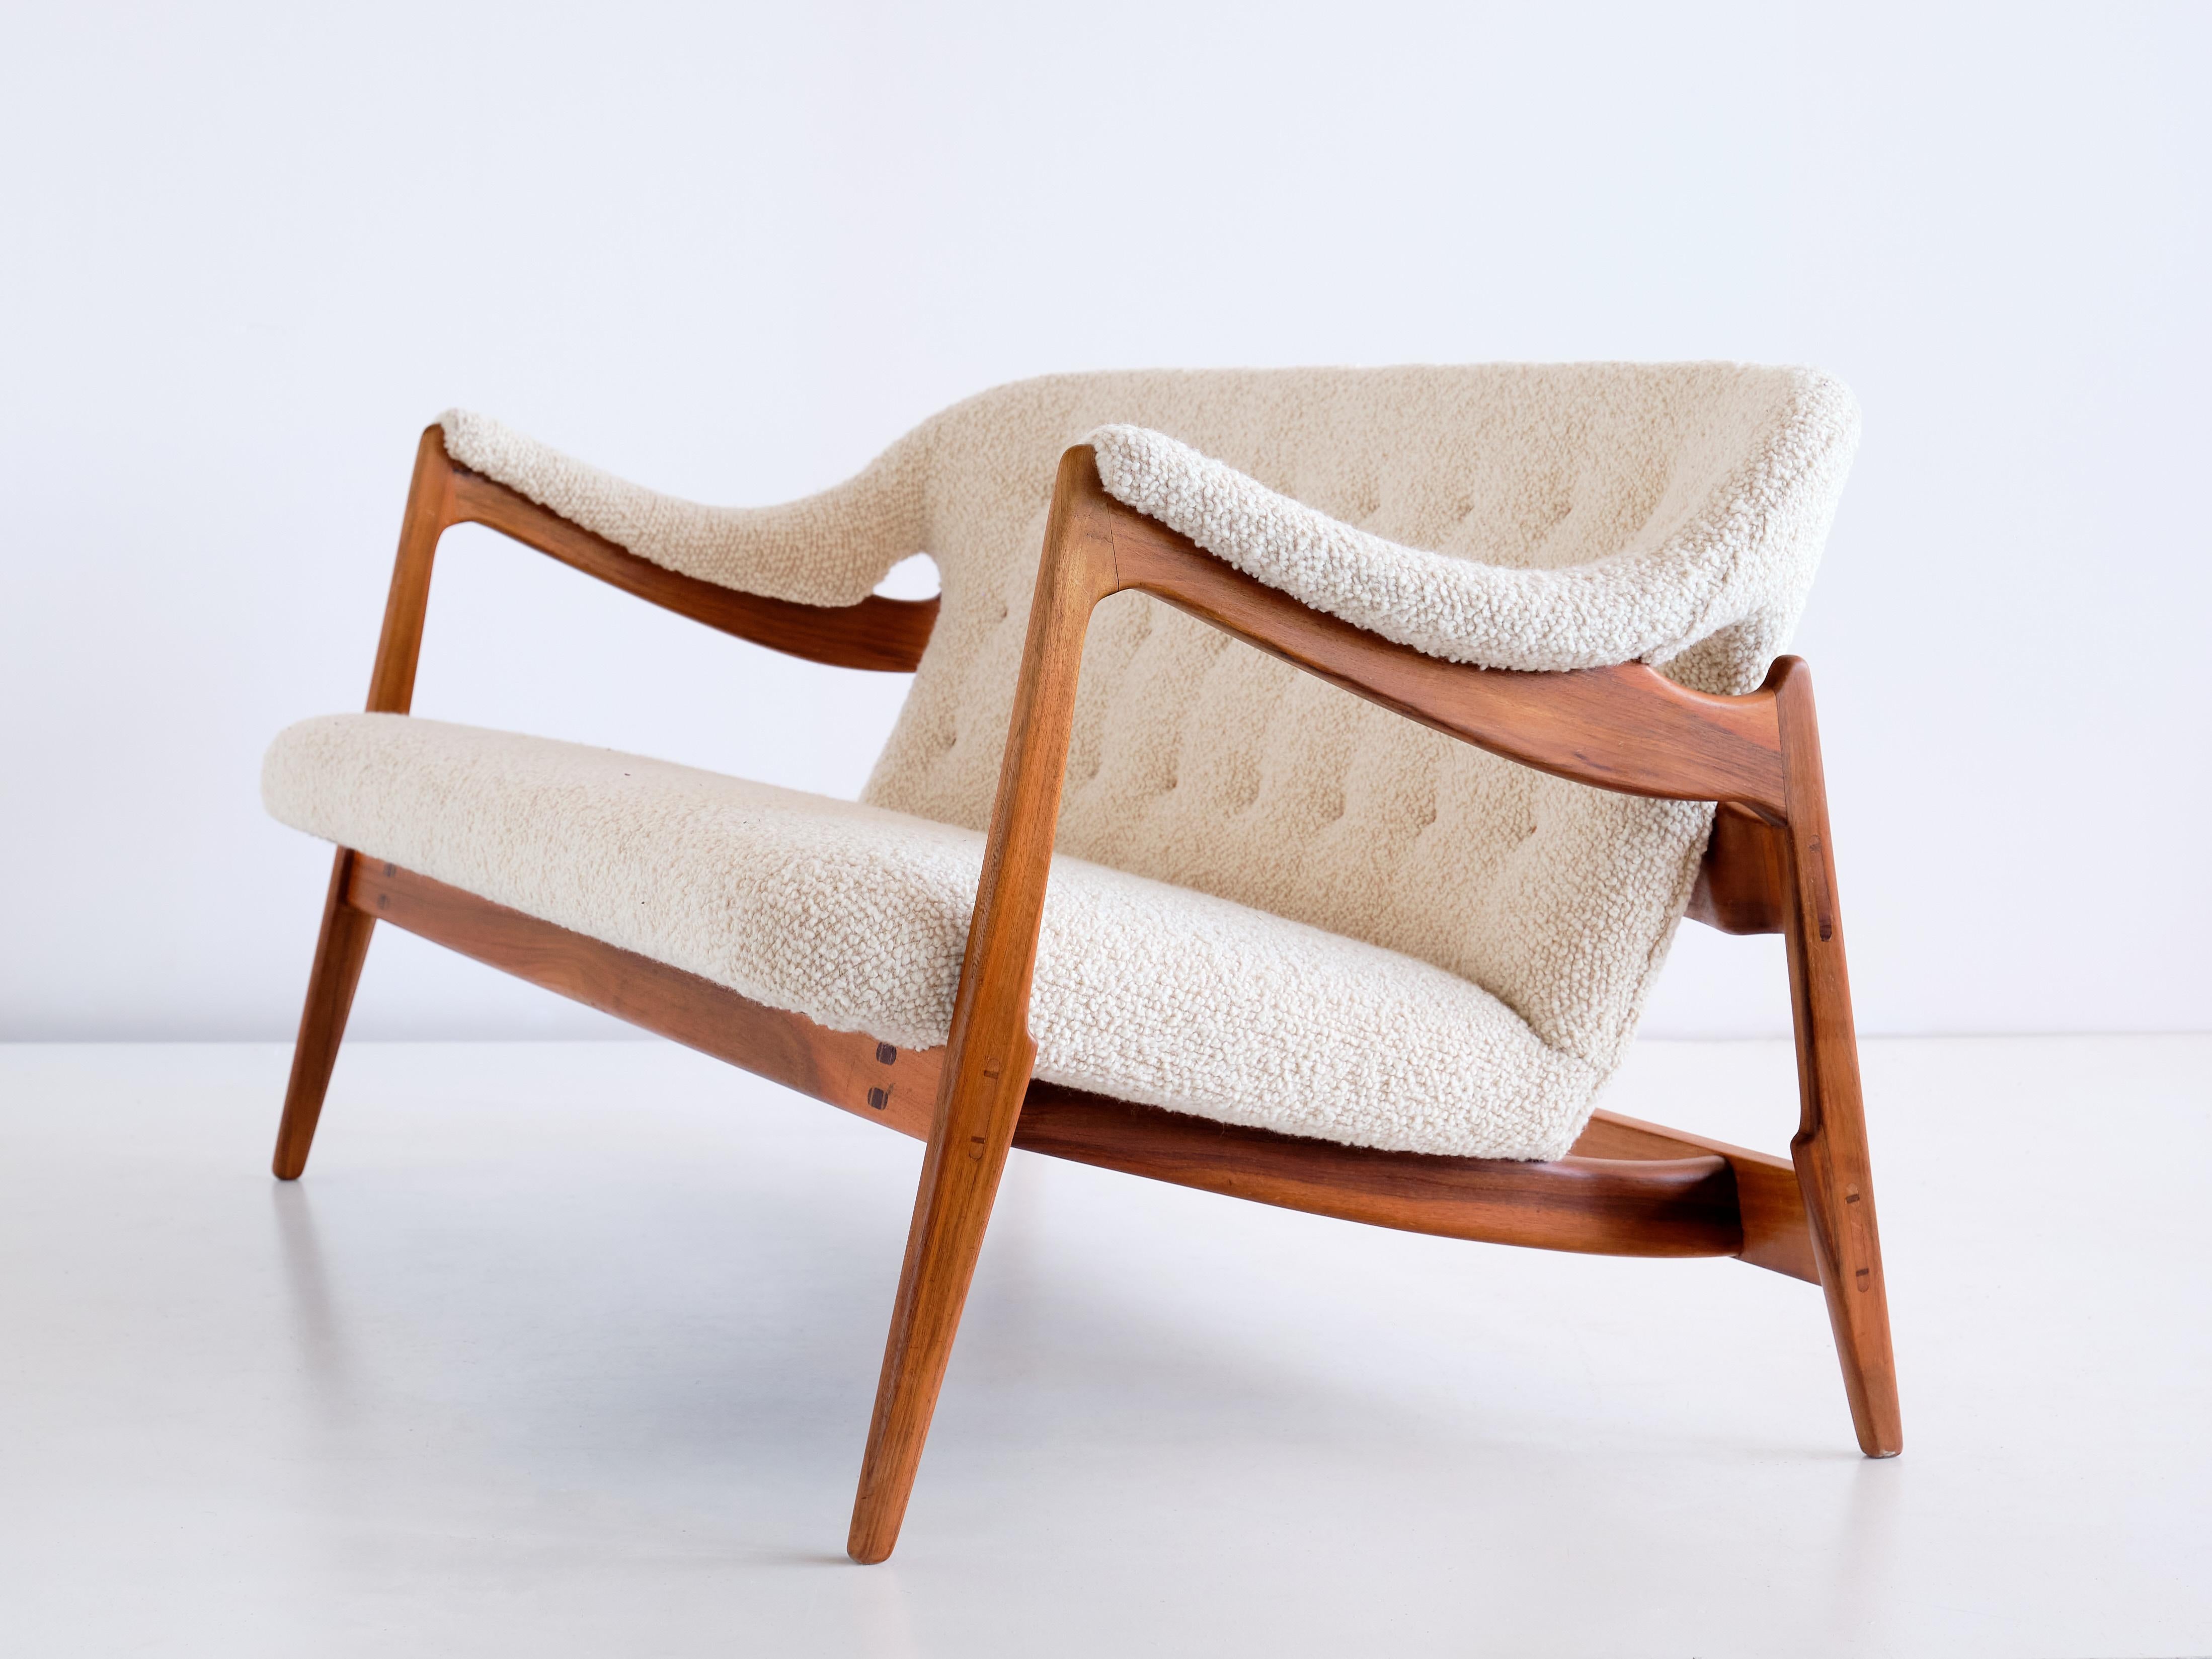 Important Brockmann Petersen Sofa in Nutwood and Bouclé, Louis G. Thiersen, 1951 For Sale 2